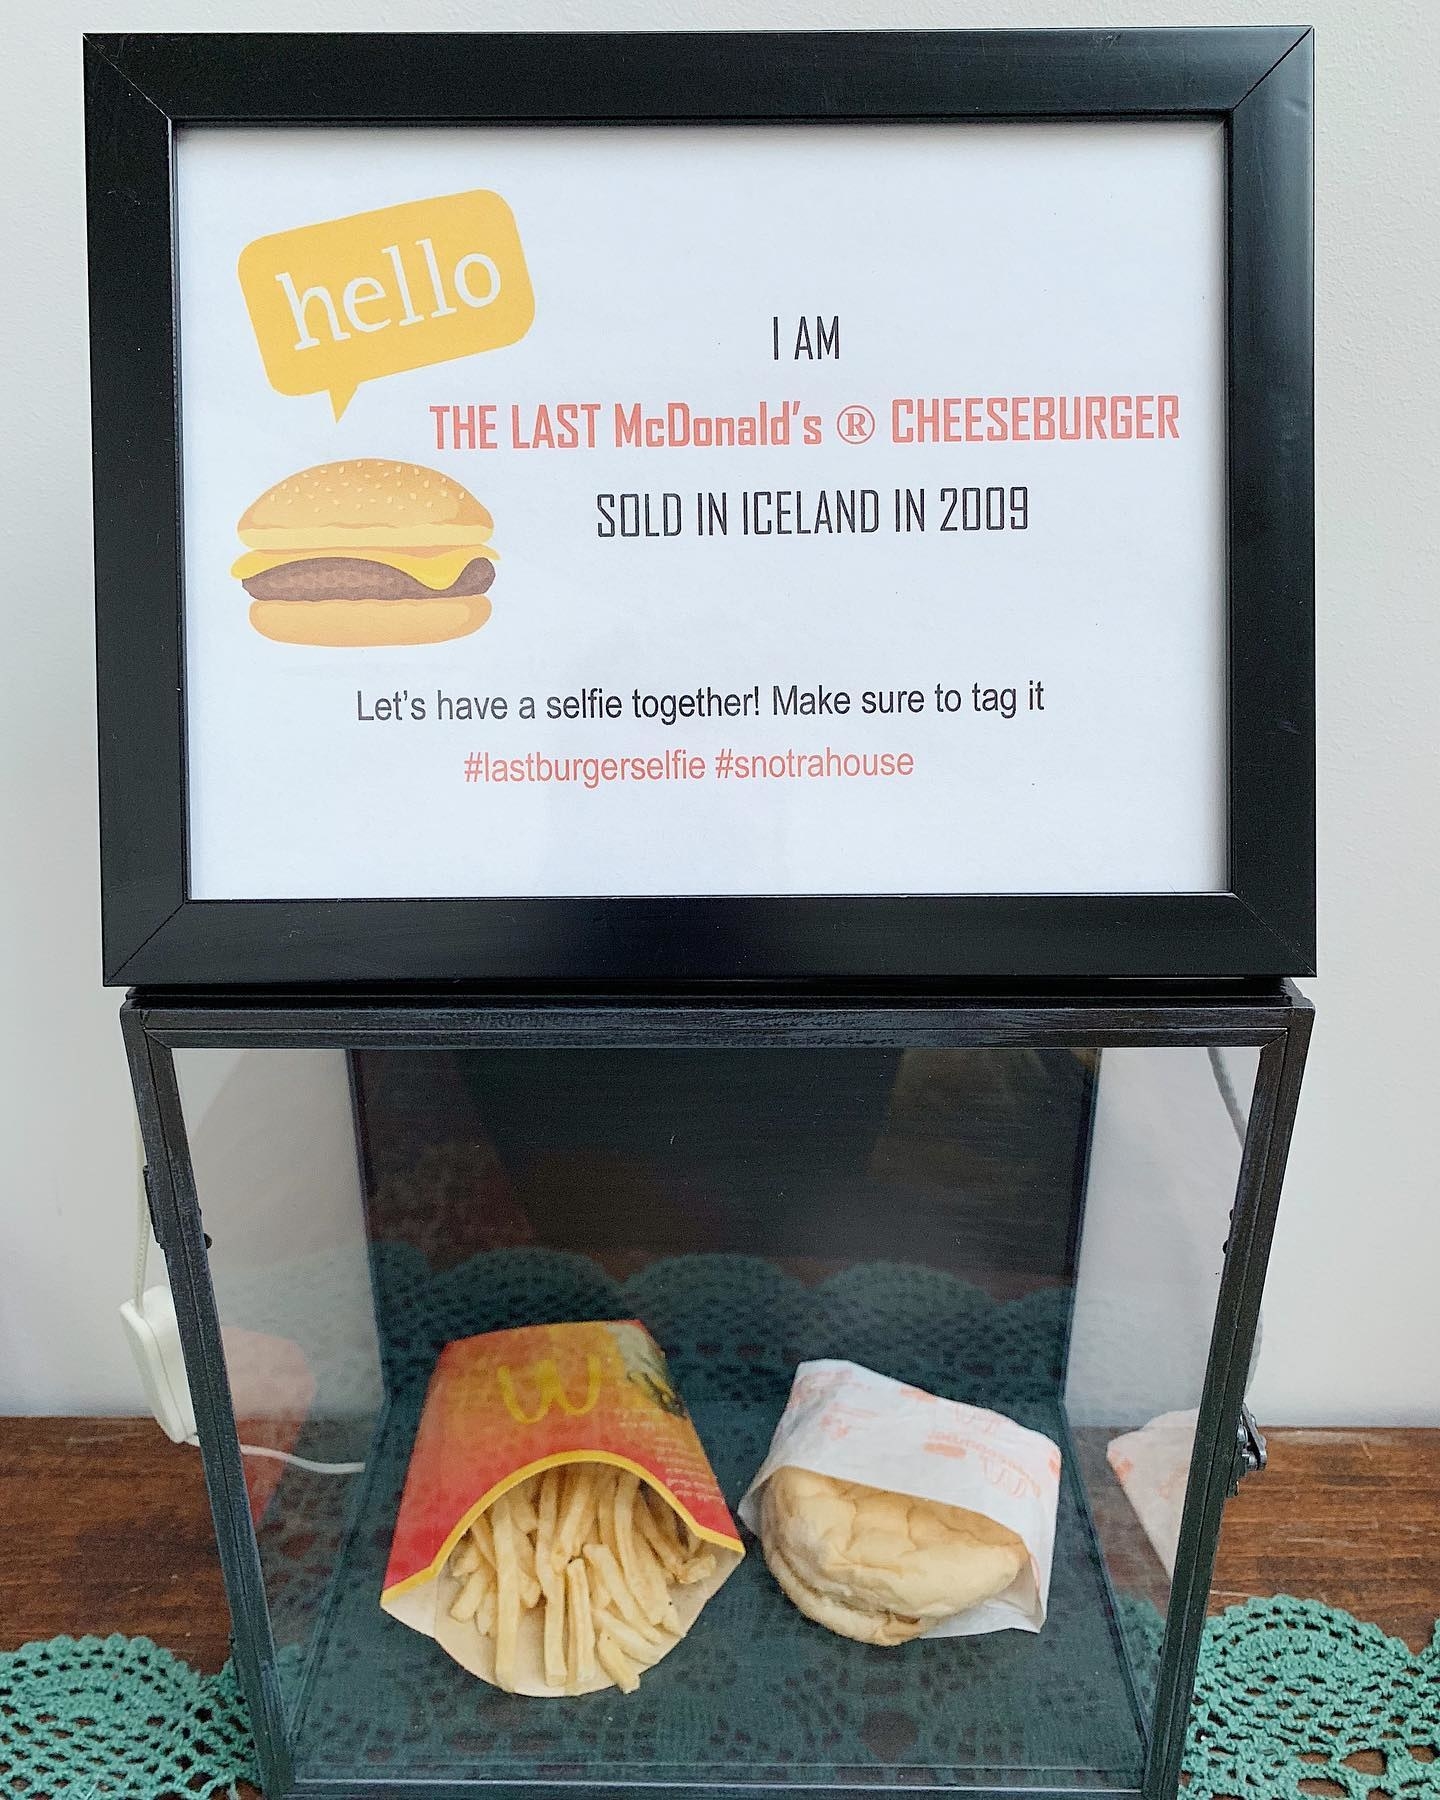 A burger and fries behind glass, with sign saying &quot;The last McDonald&#x27;s cheeseburger sold in Iceland in 2009&quot;